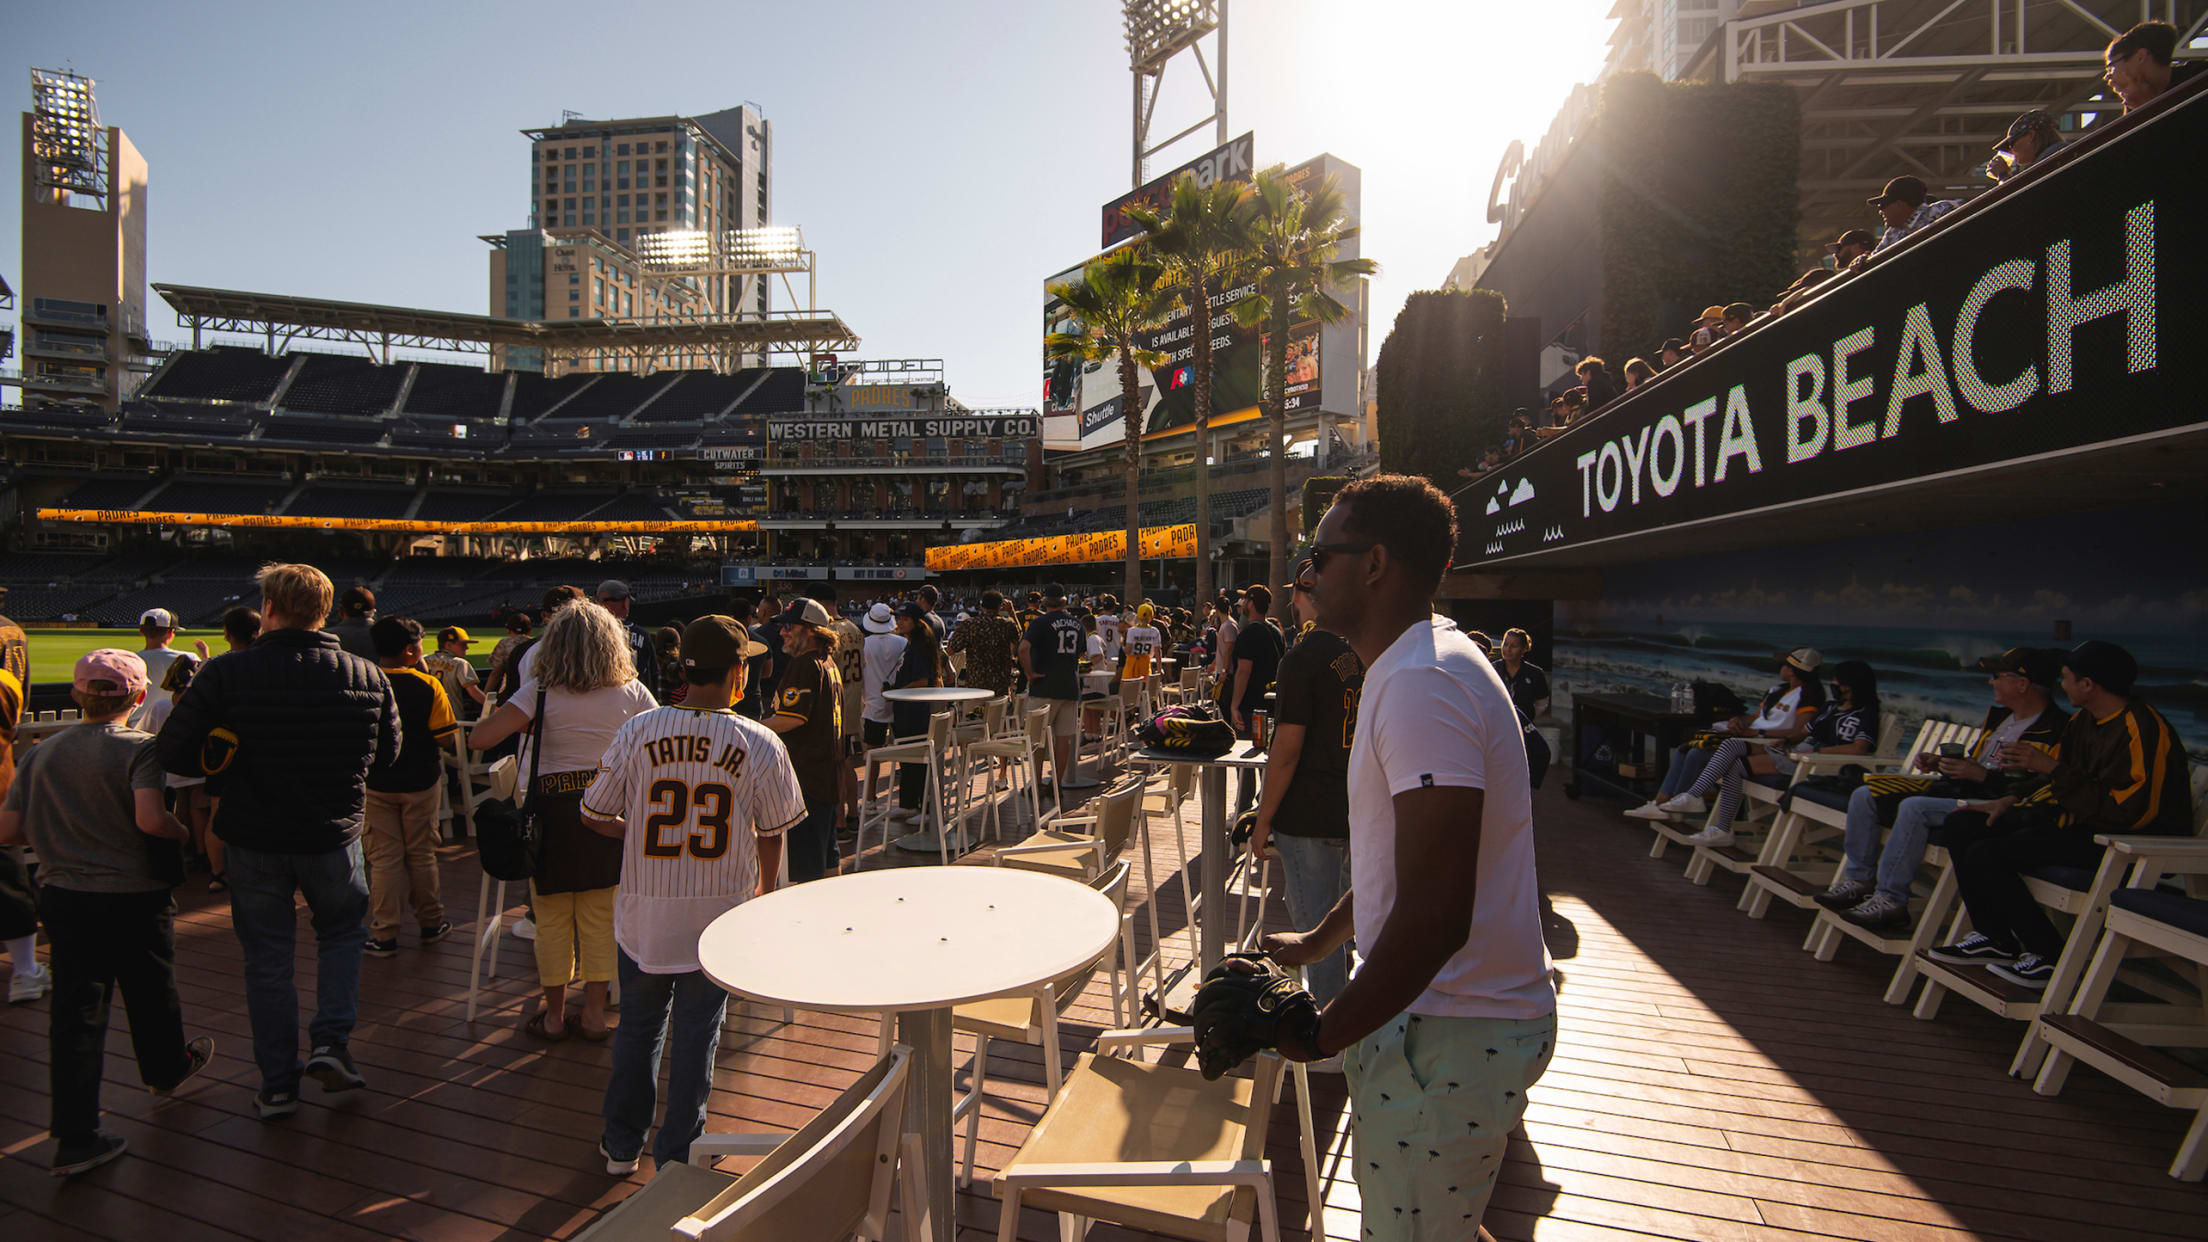 Get Your Specially Priced San Diego Padres Tickets From ! ⋆  Gaslamp Quarter